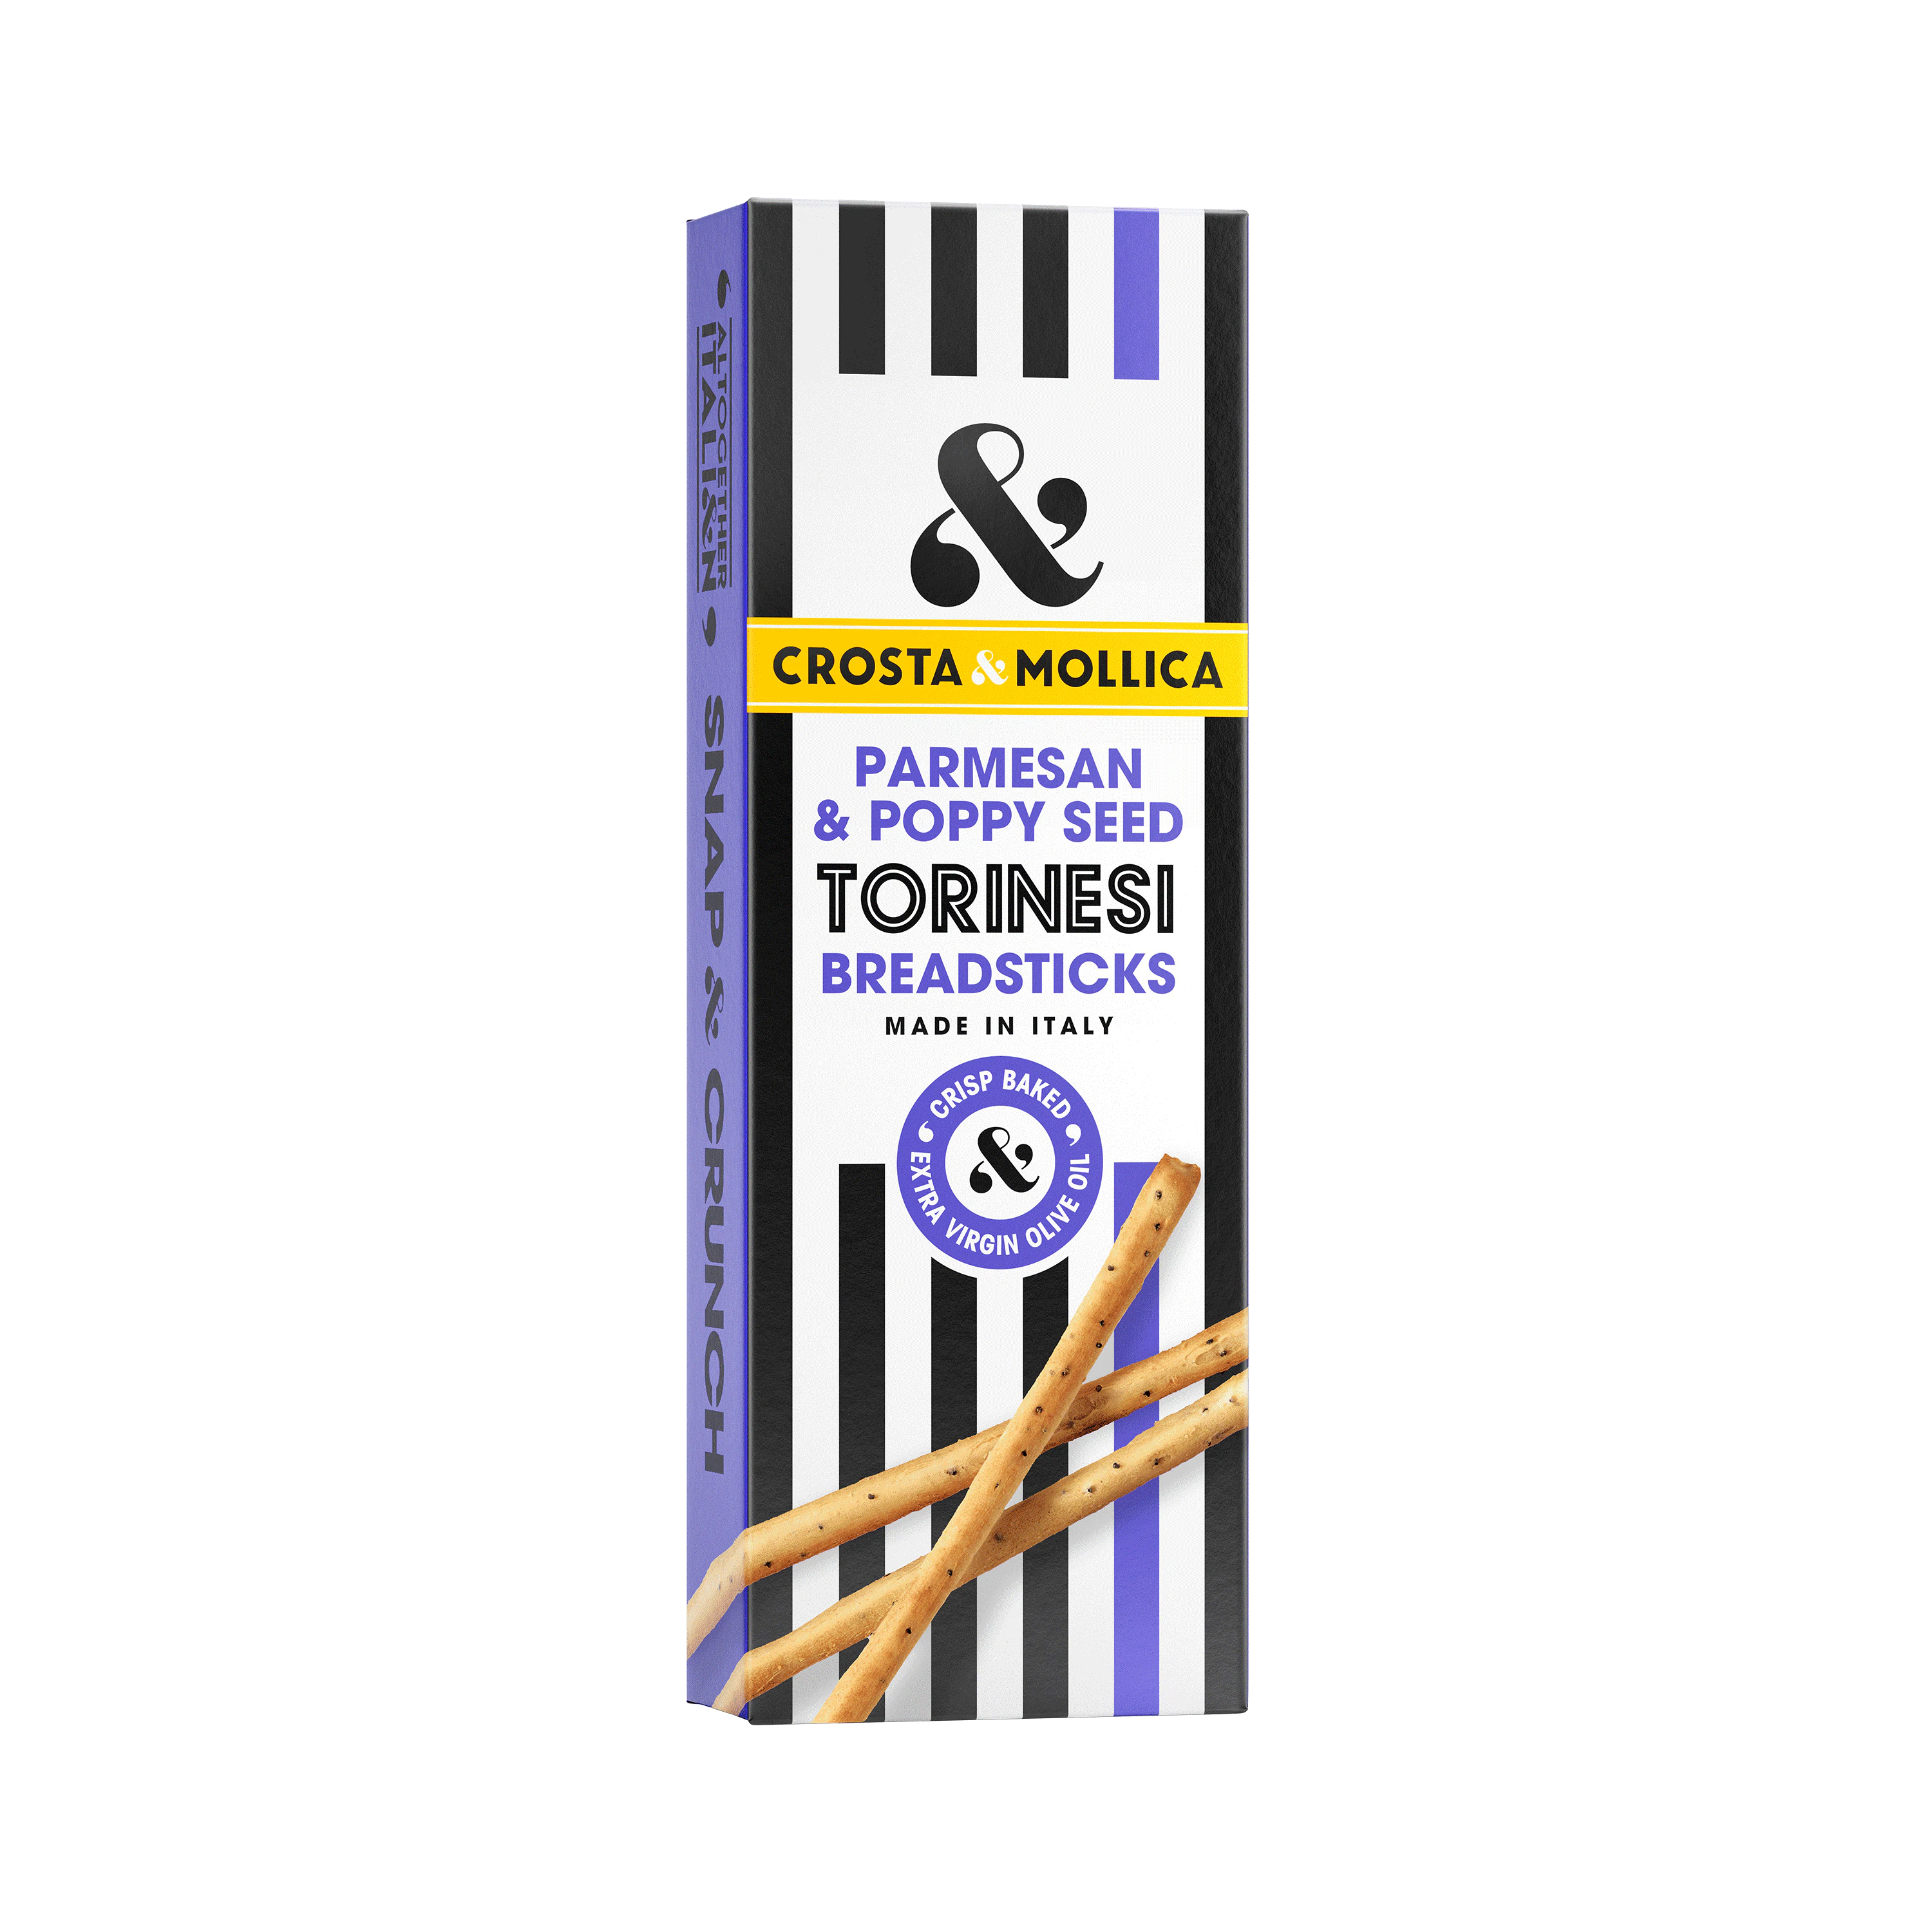 Parmesan and poppy seed Torinesi packaging.